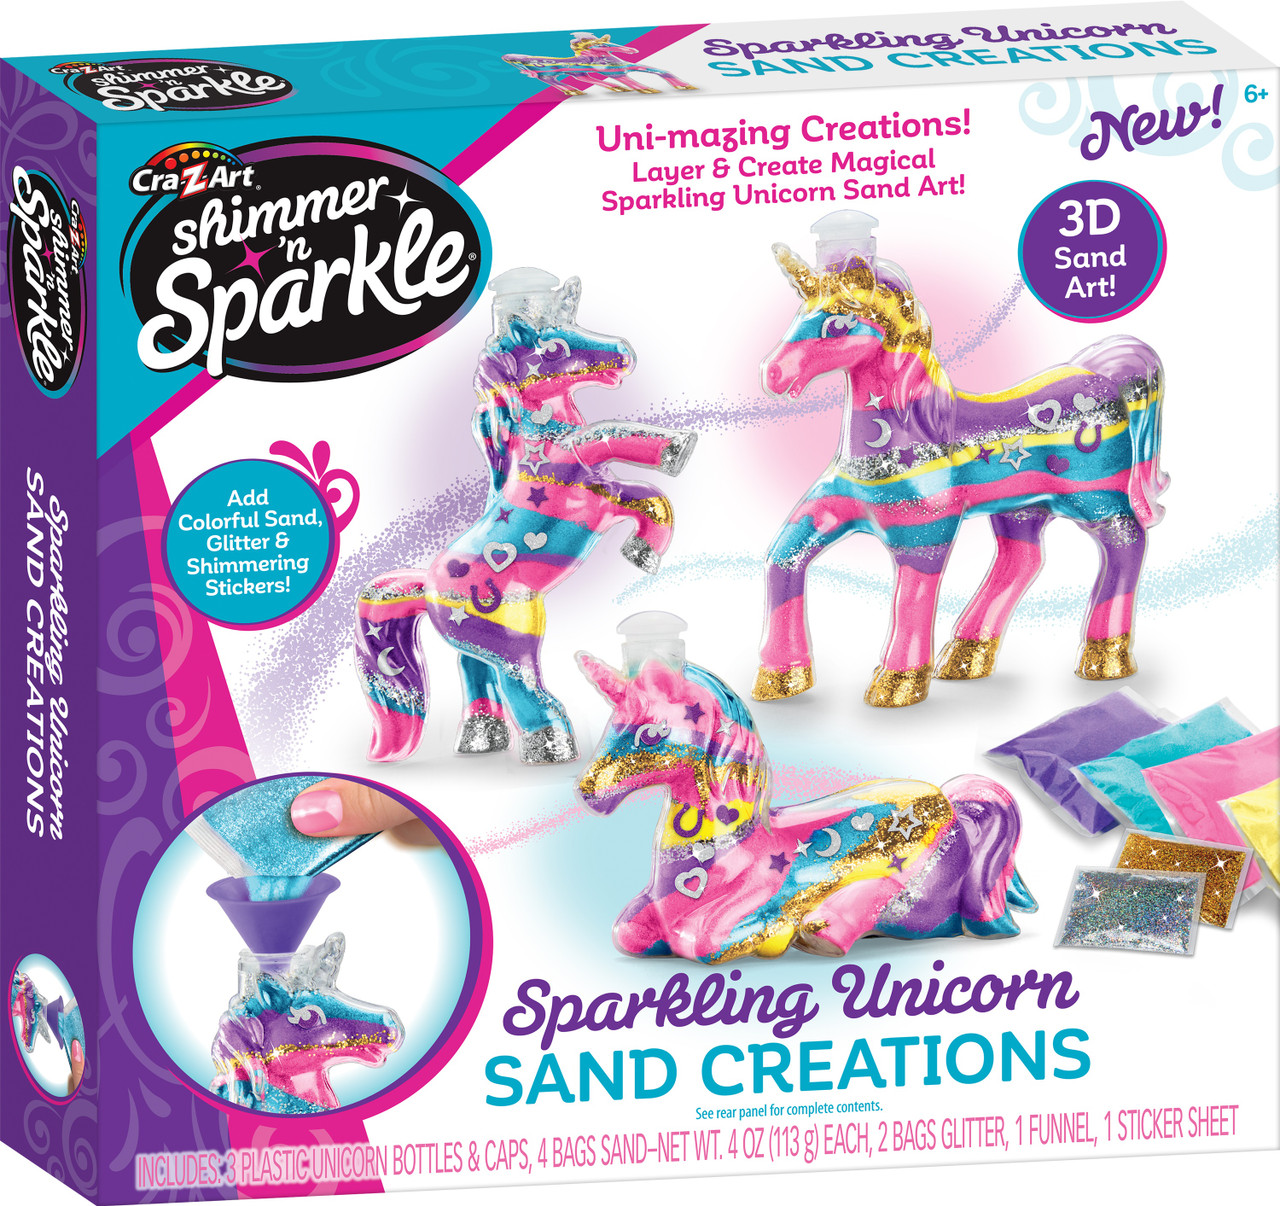  Sequin Art 3D Series Unicorn Figurine, Sparkling Arts and  Crafts Kit; Creative Crafts for Adults and Kids : Toys & Games